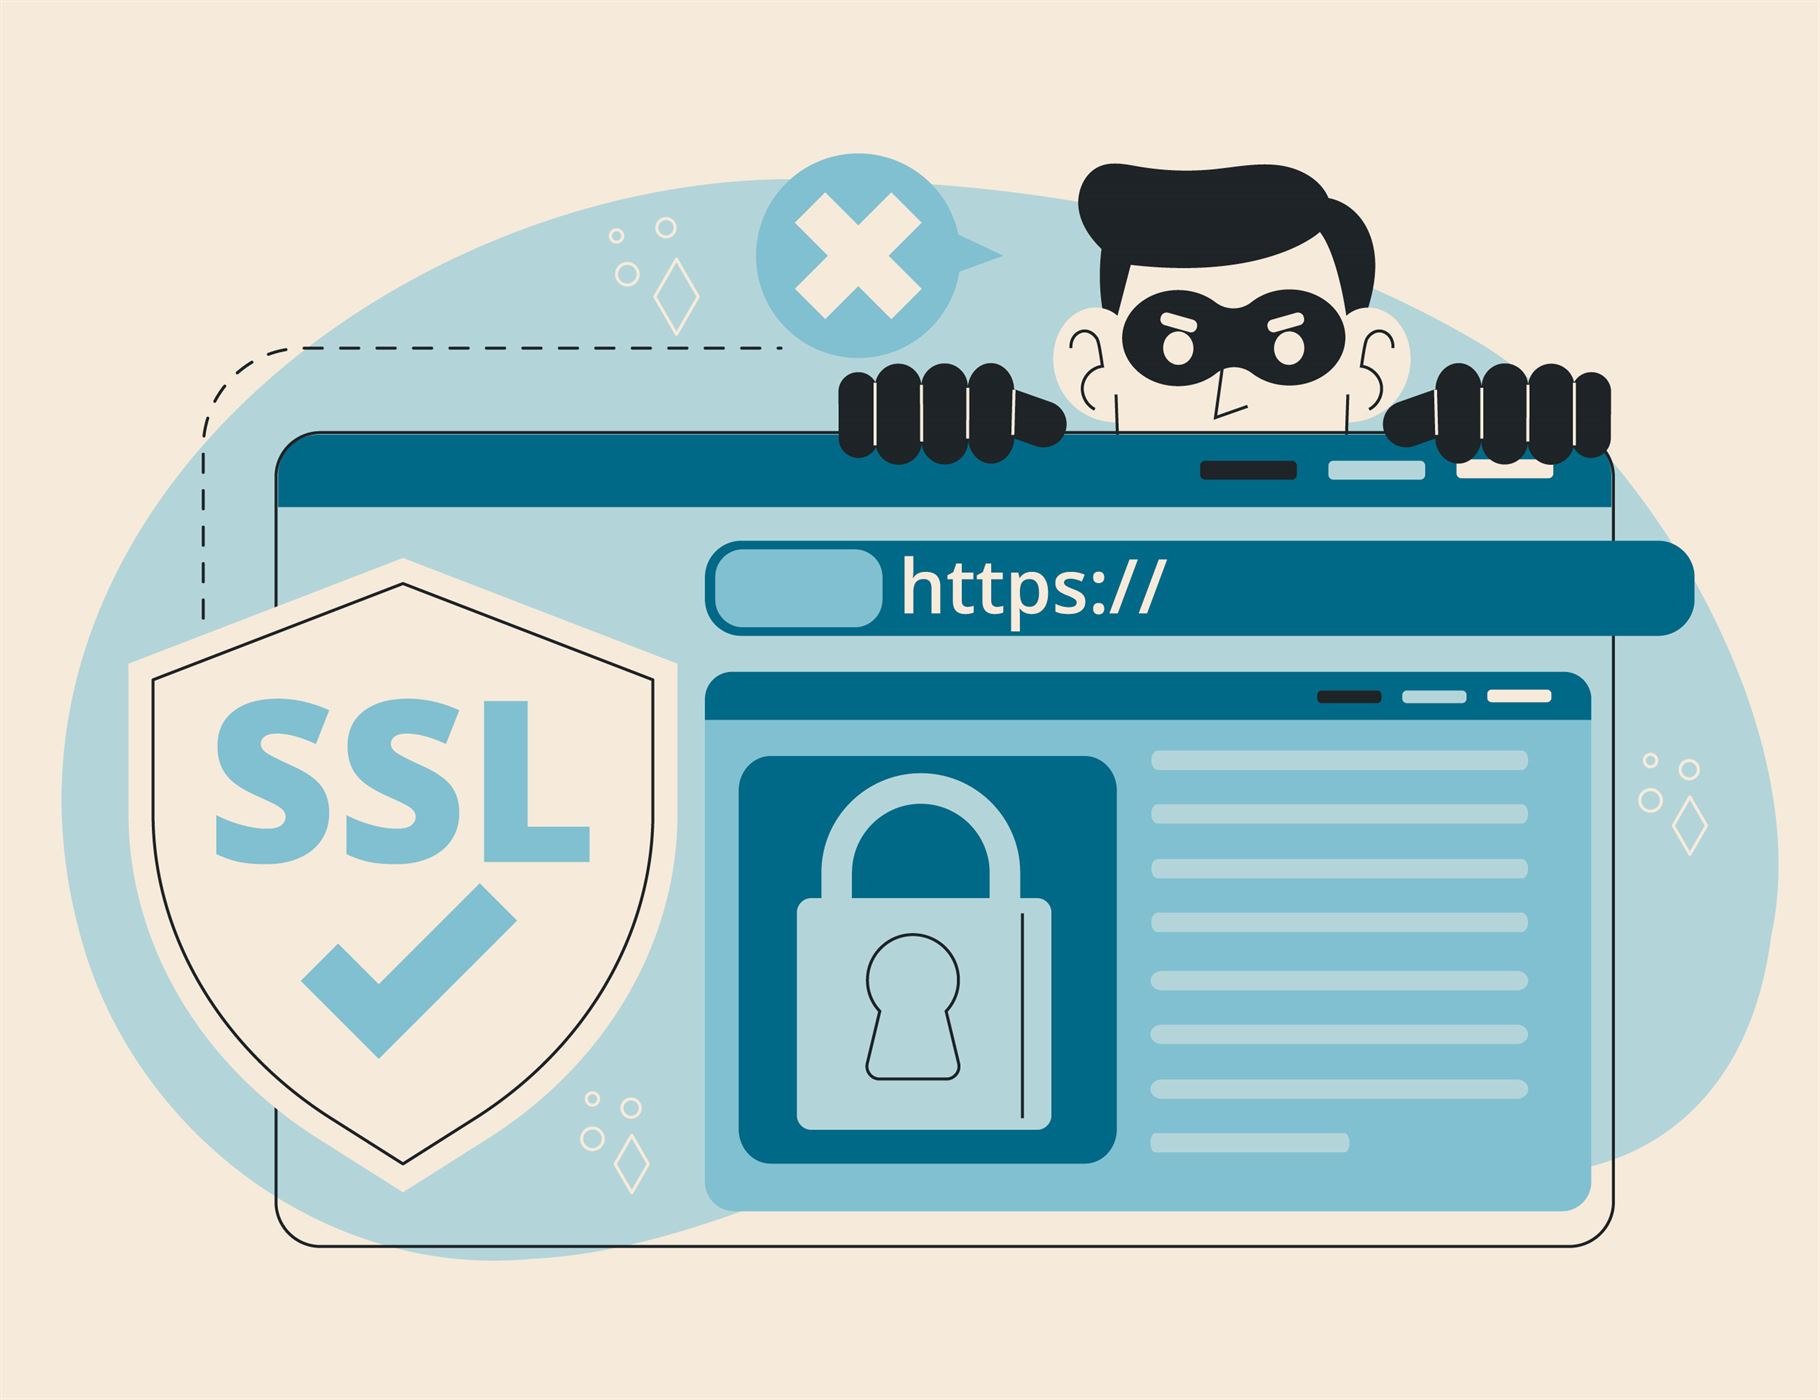 Check the expiration date of the SSL certificate using OpenSSL